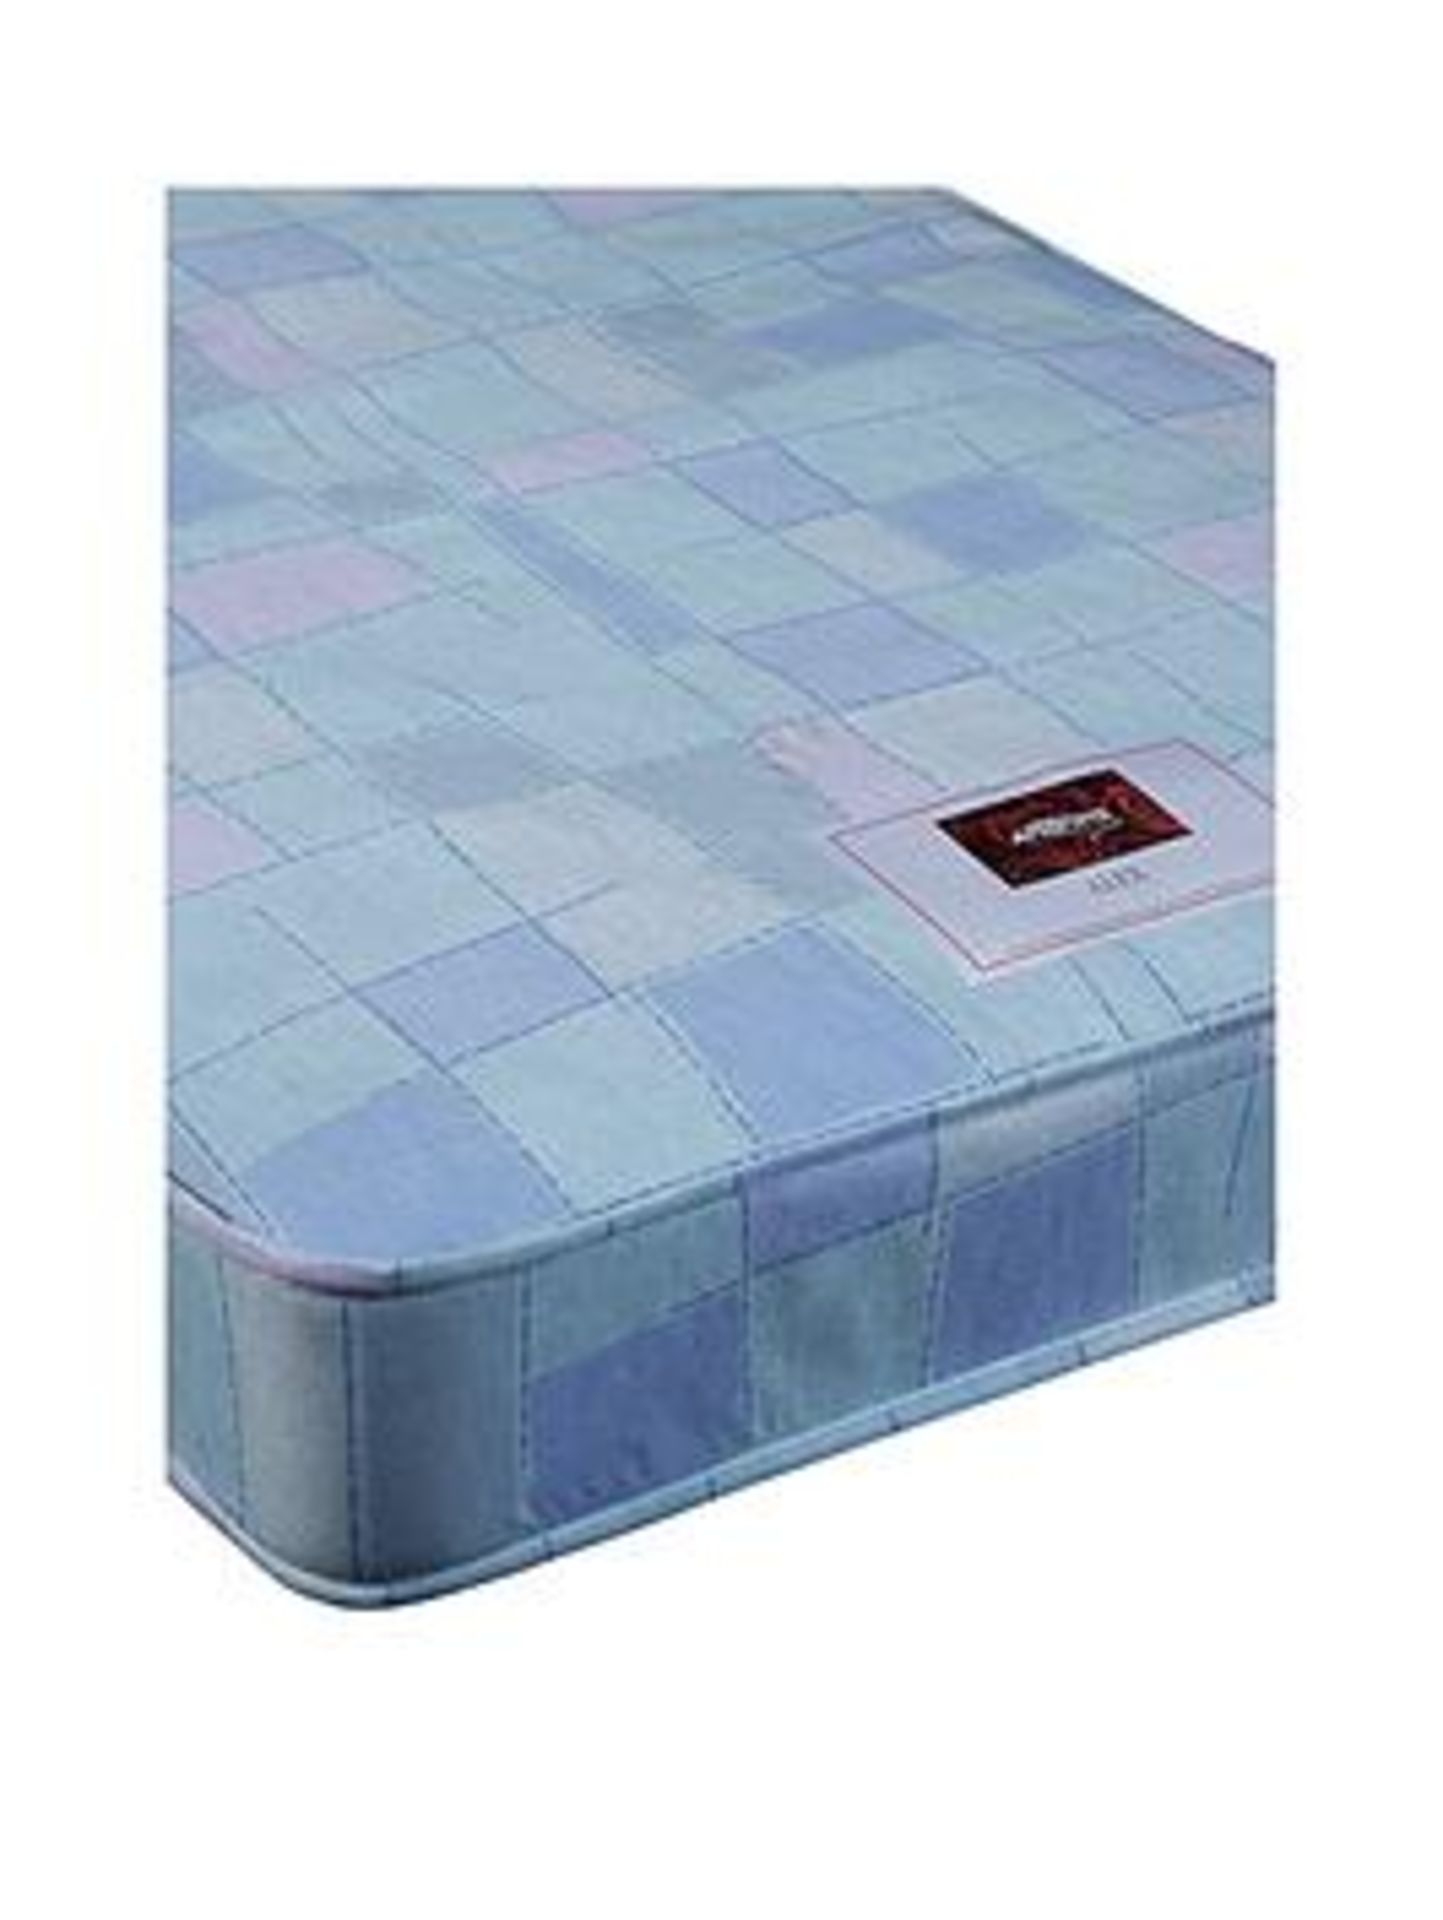 Boxed Item Airsprung Standard Small Double Mattress [Blue] 15X120X190Cm rrp, £178.0